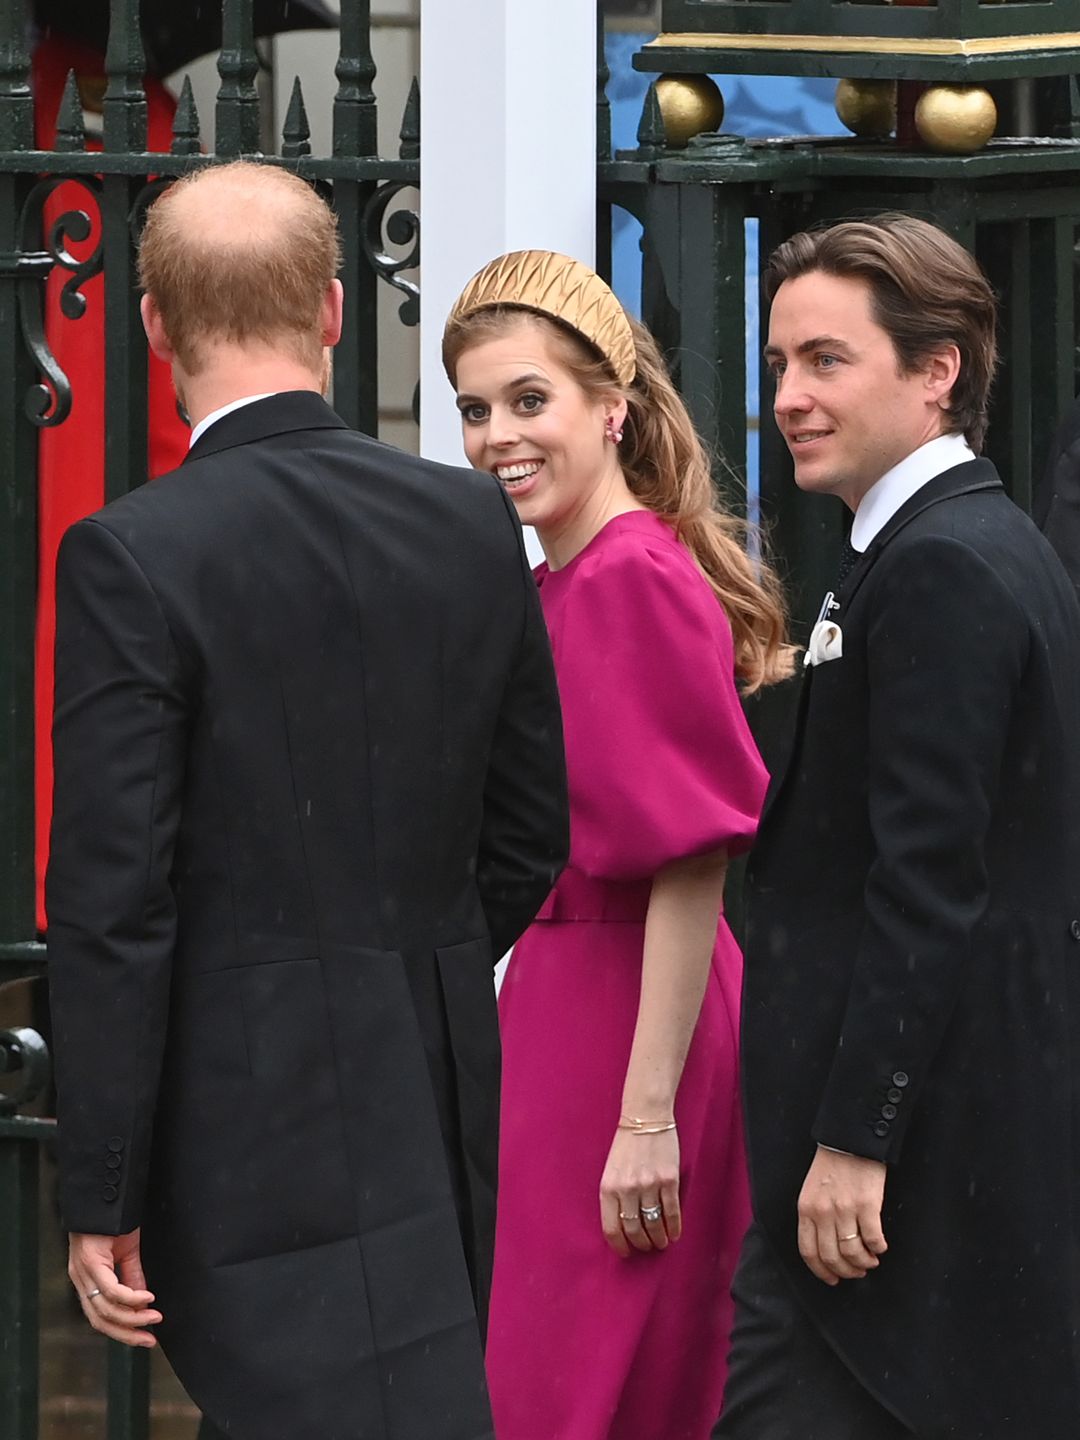 Princess Beatrice of York and Edoardo Mapelli Mozzi arrived at the Coronation of King Charles III and Queen Camilla